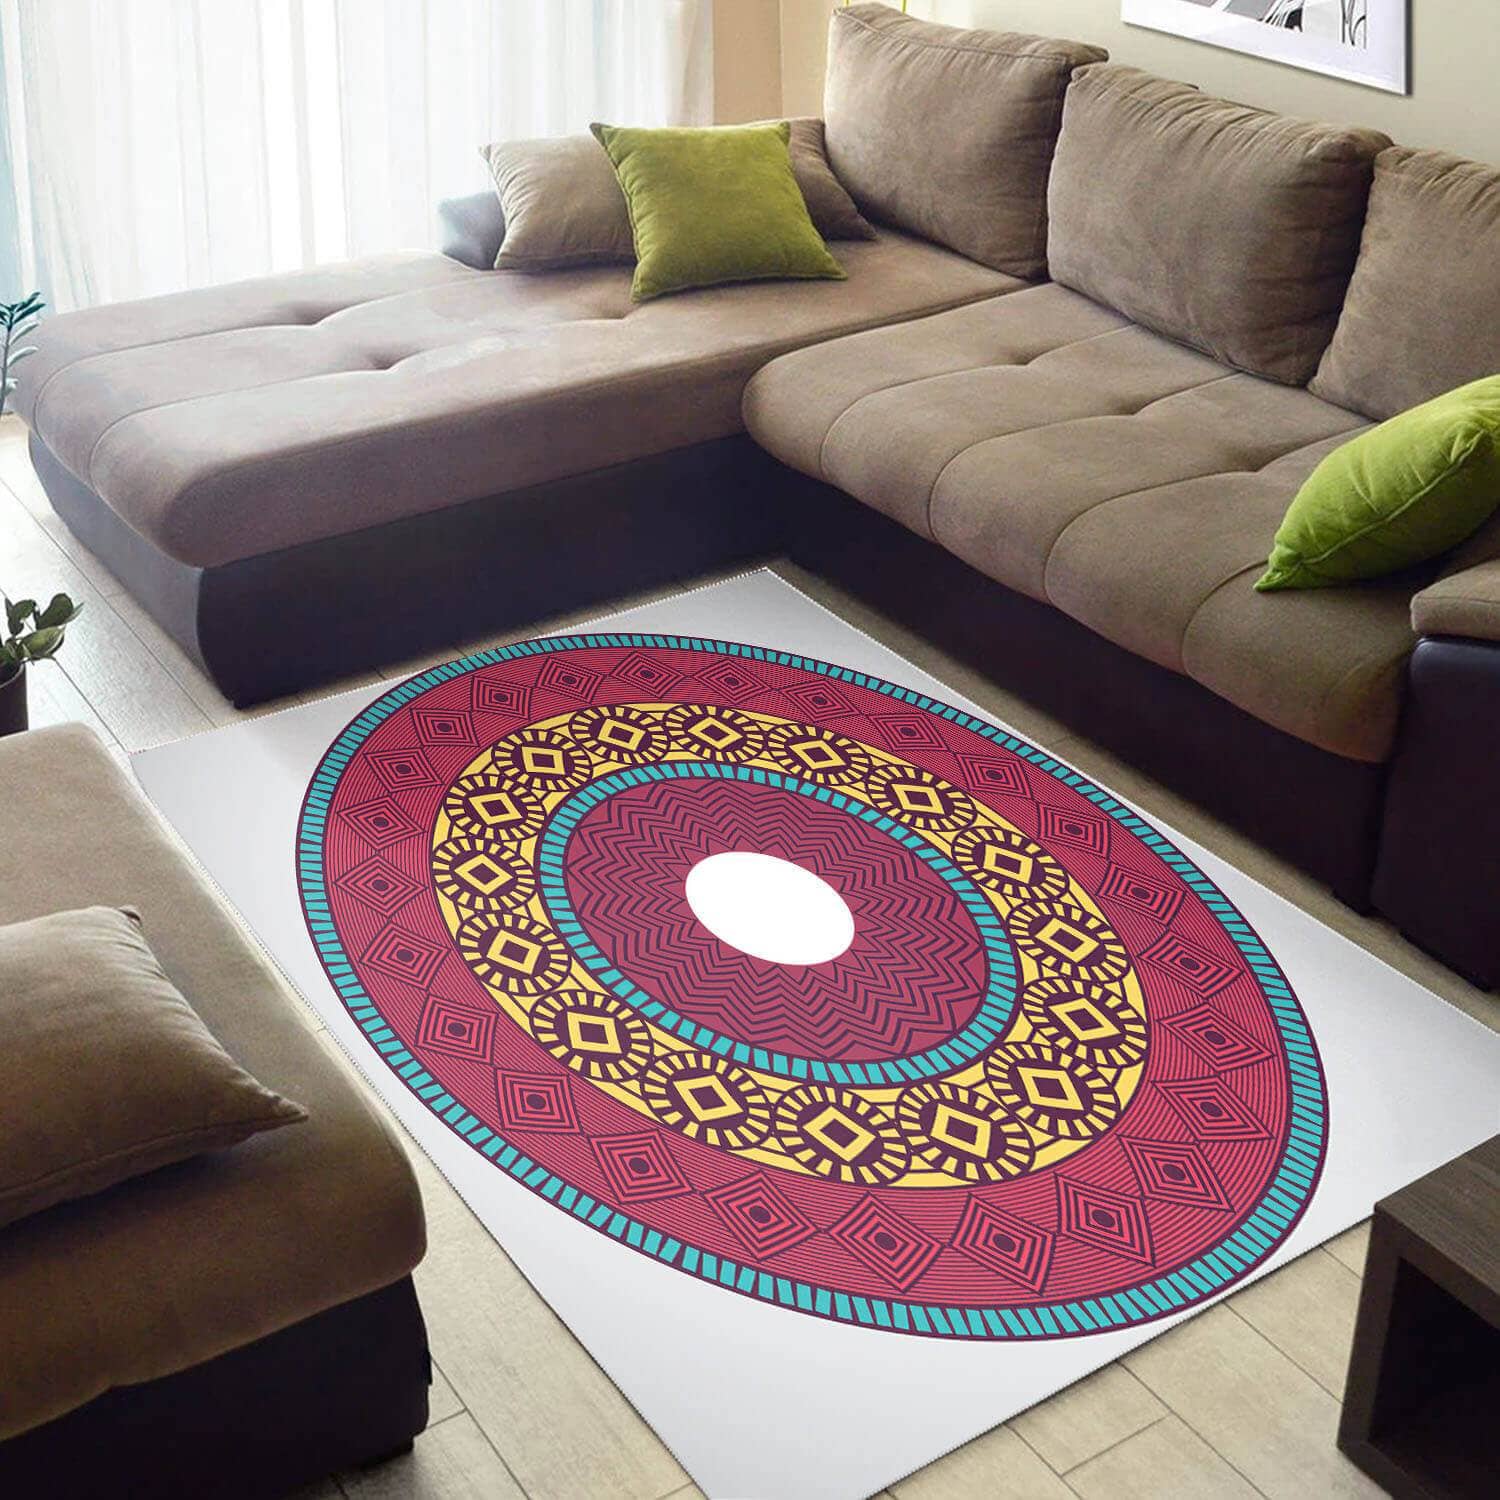 Trendy African Style Adorable Natural Hair Seamless Pattern Design Floor Inspired Living Room Rug